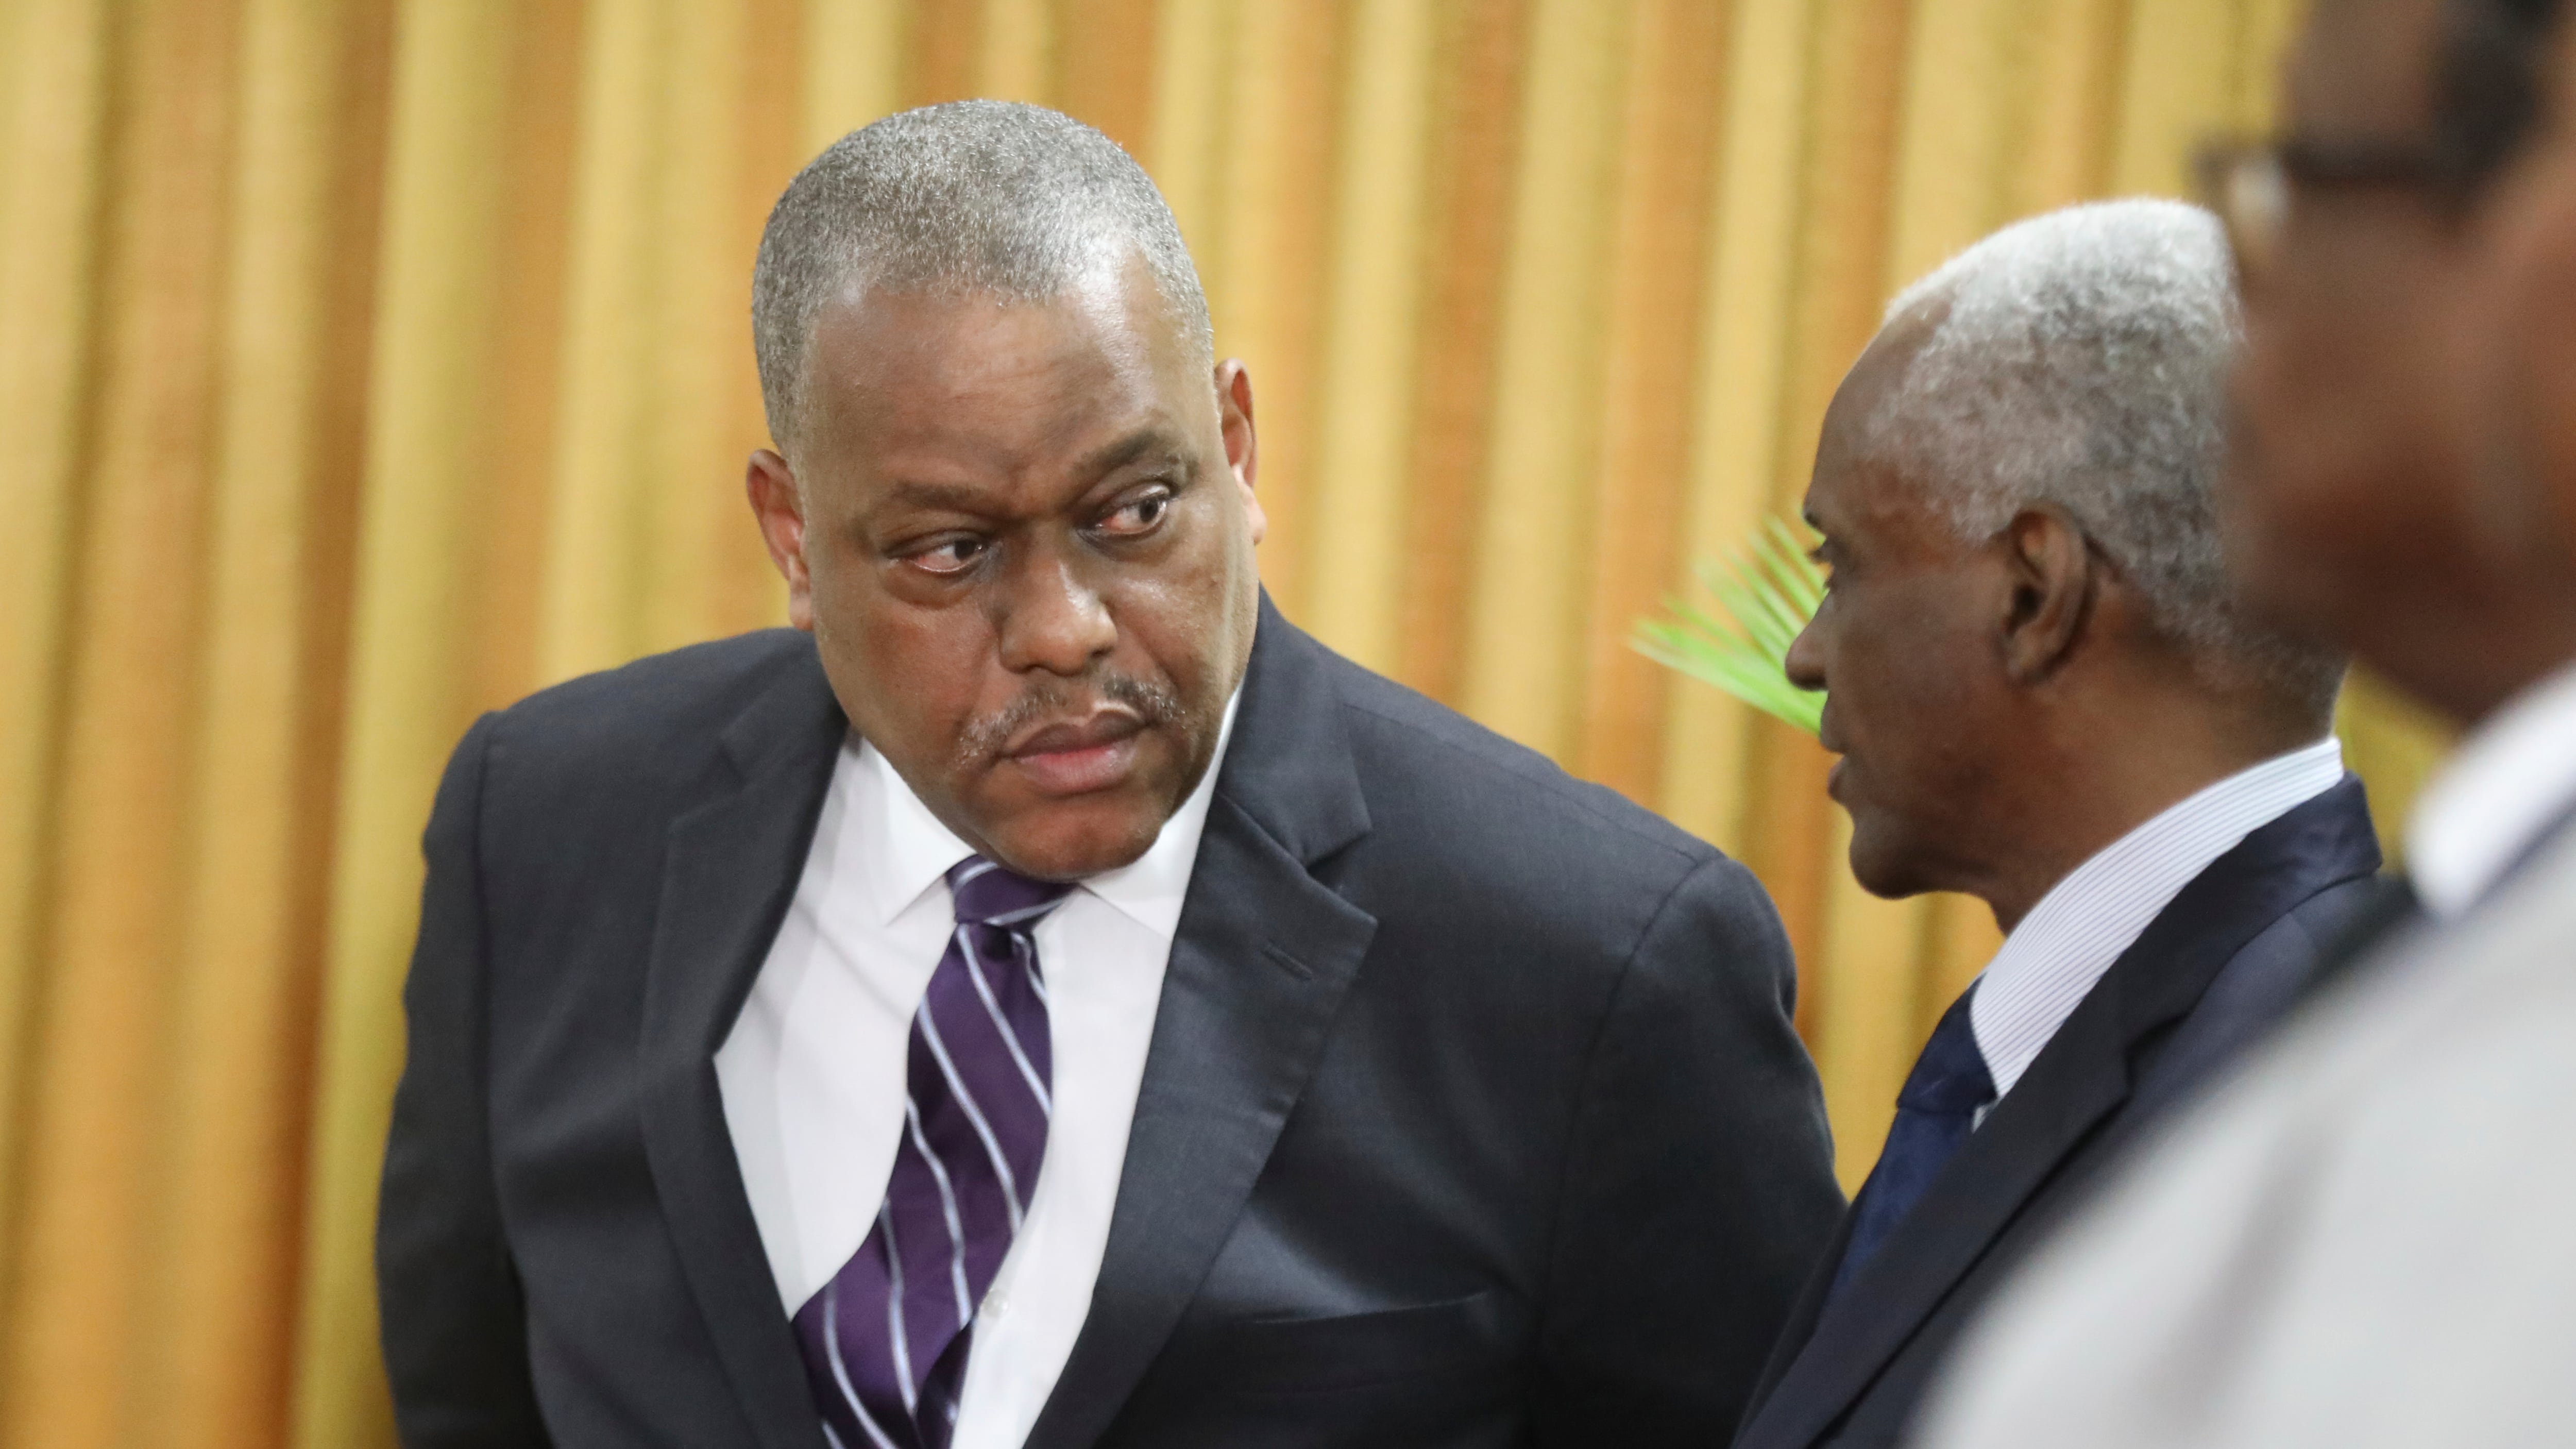 New Haitian Prime Minister Garry Conille, left, speaks to the president of the council Edgard Leblanc Fils during his swearing-in ceremony in Port-au-Prince, Haiti (Odelyn Joseph/AP)